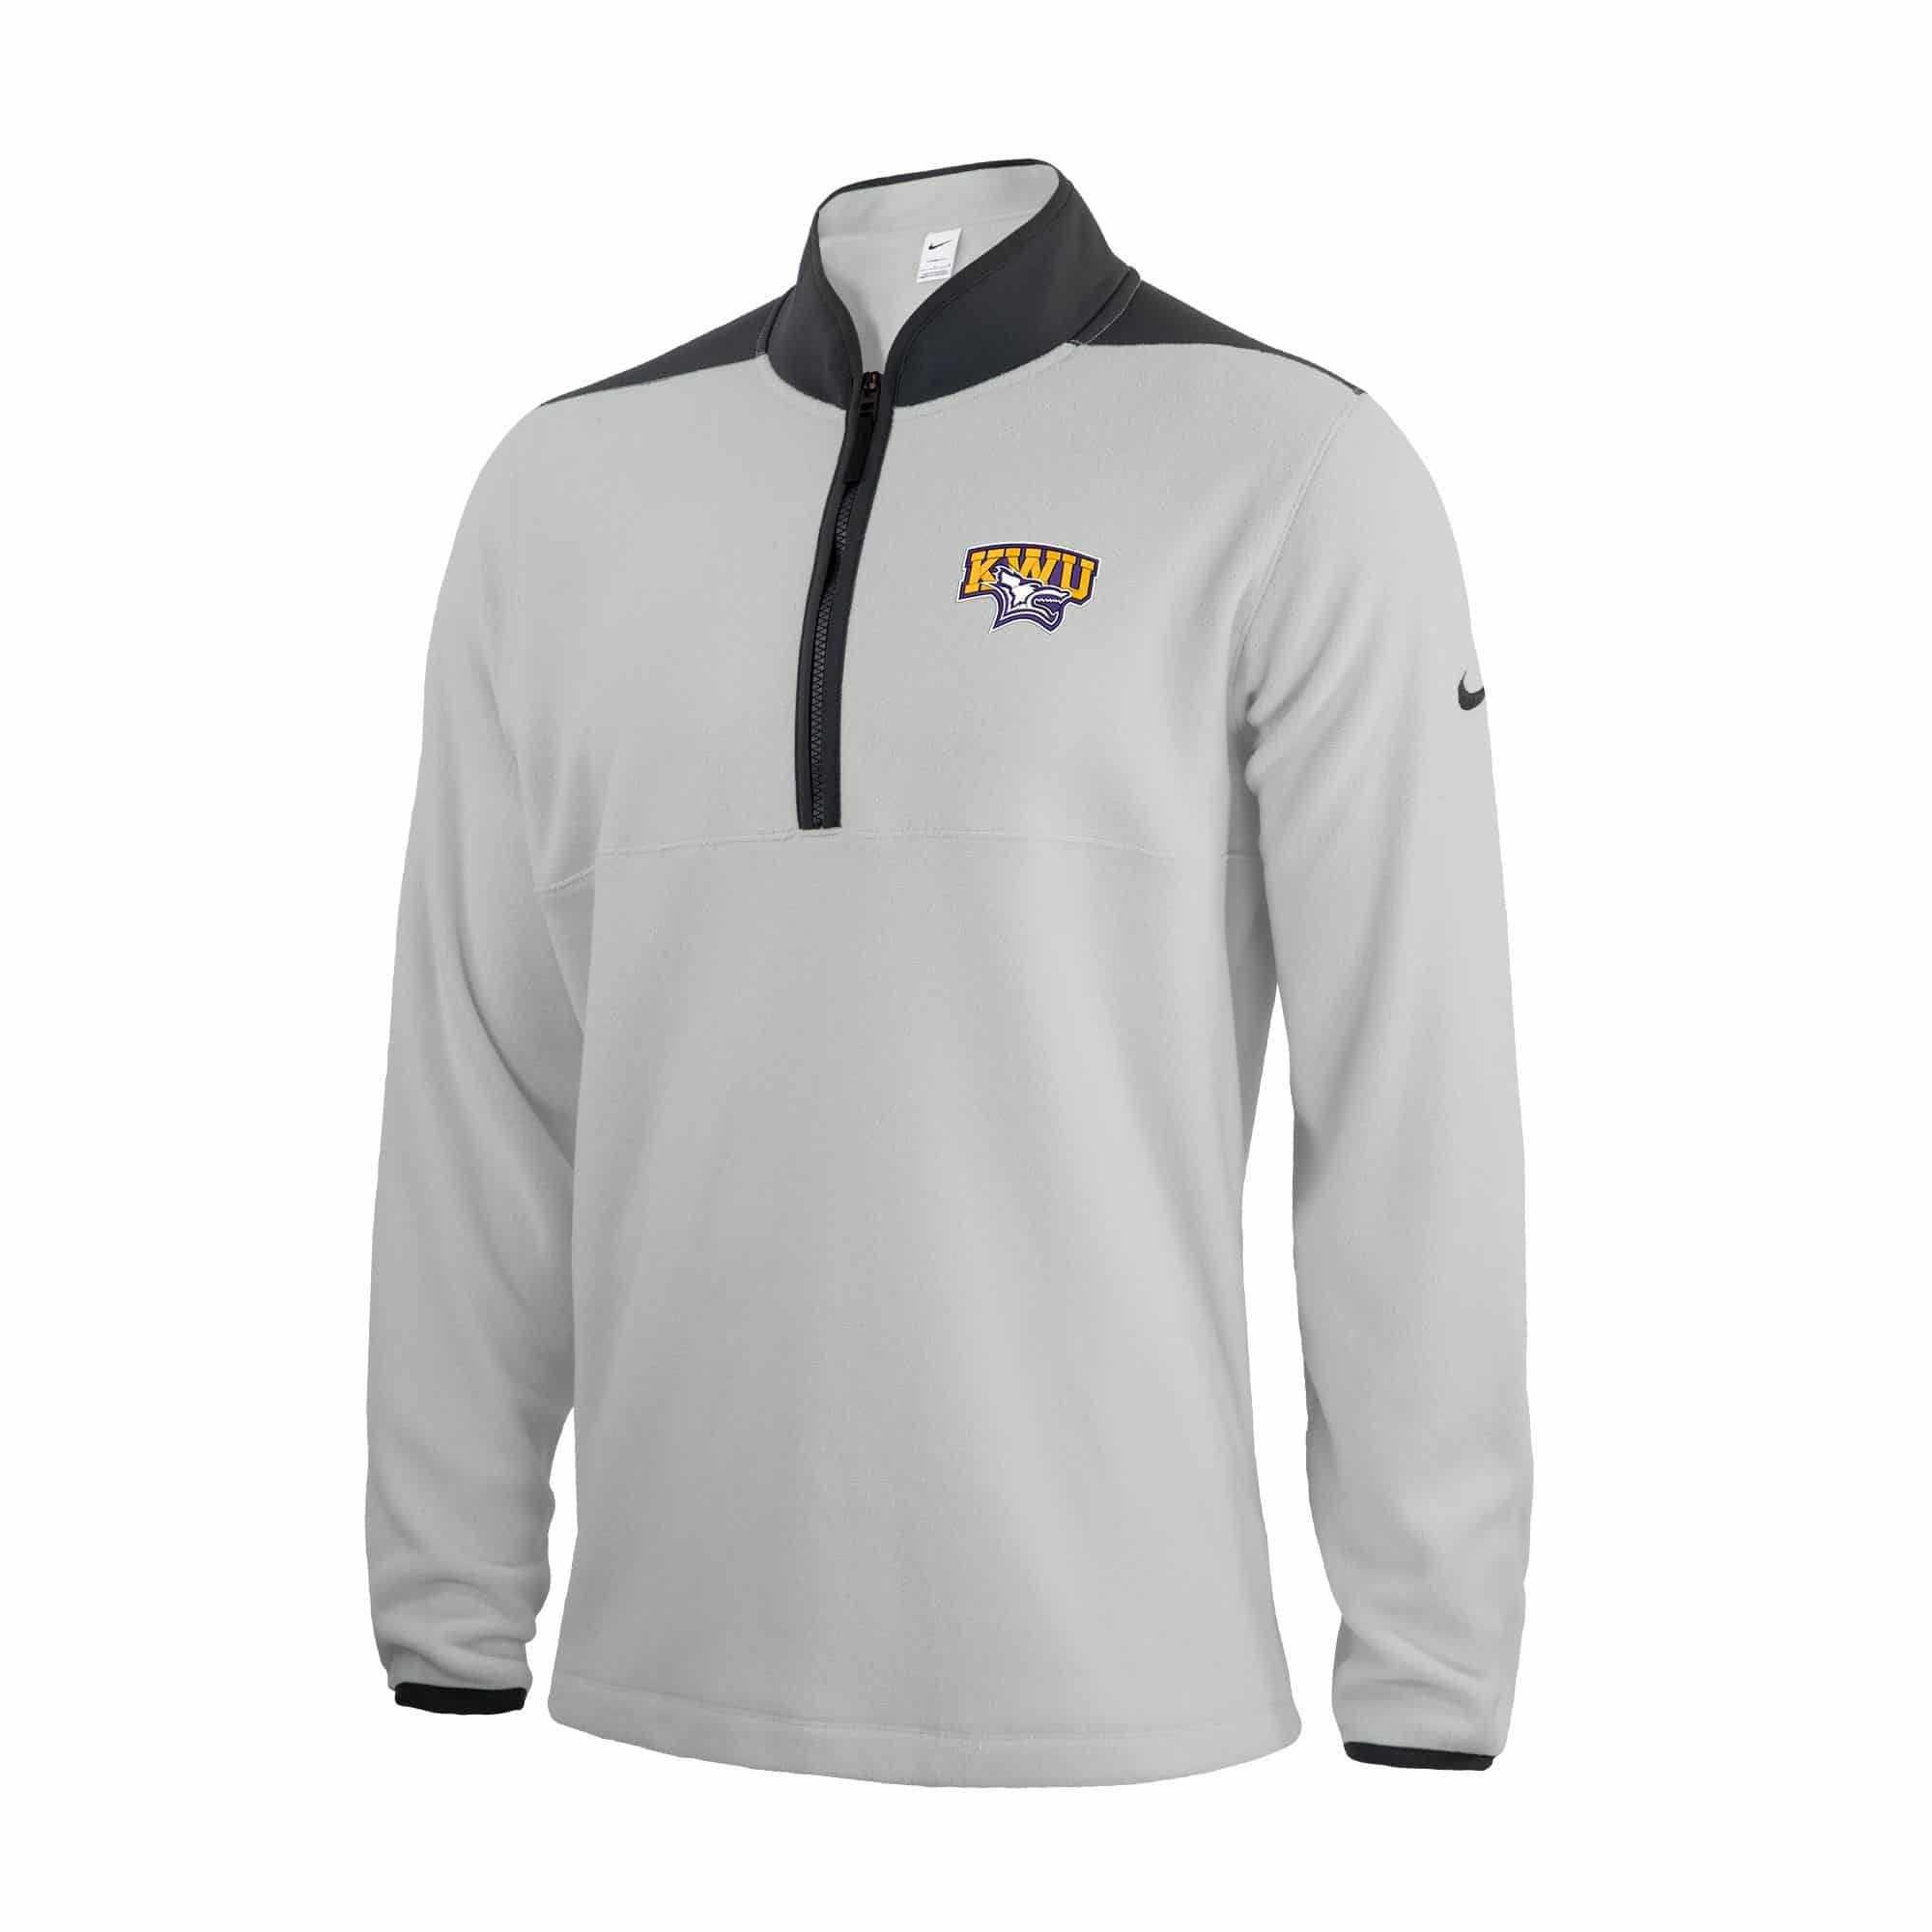 Nike Therma Fit Victory 1/2 Zip Photon Dust